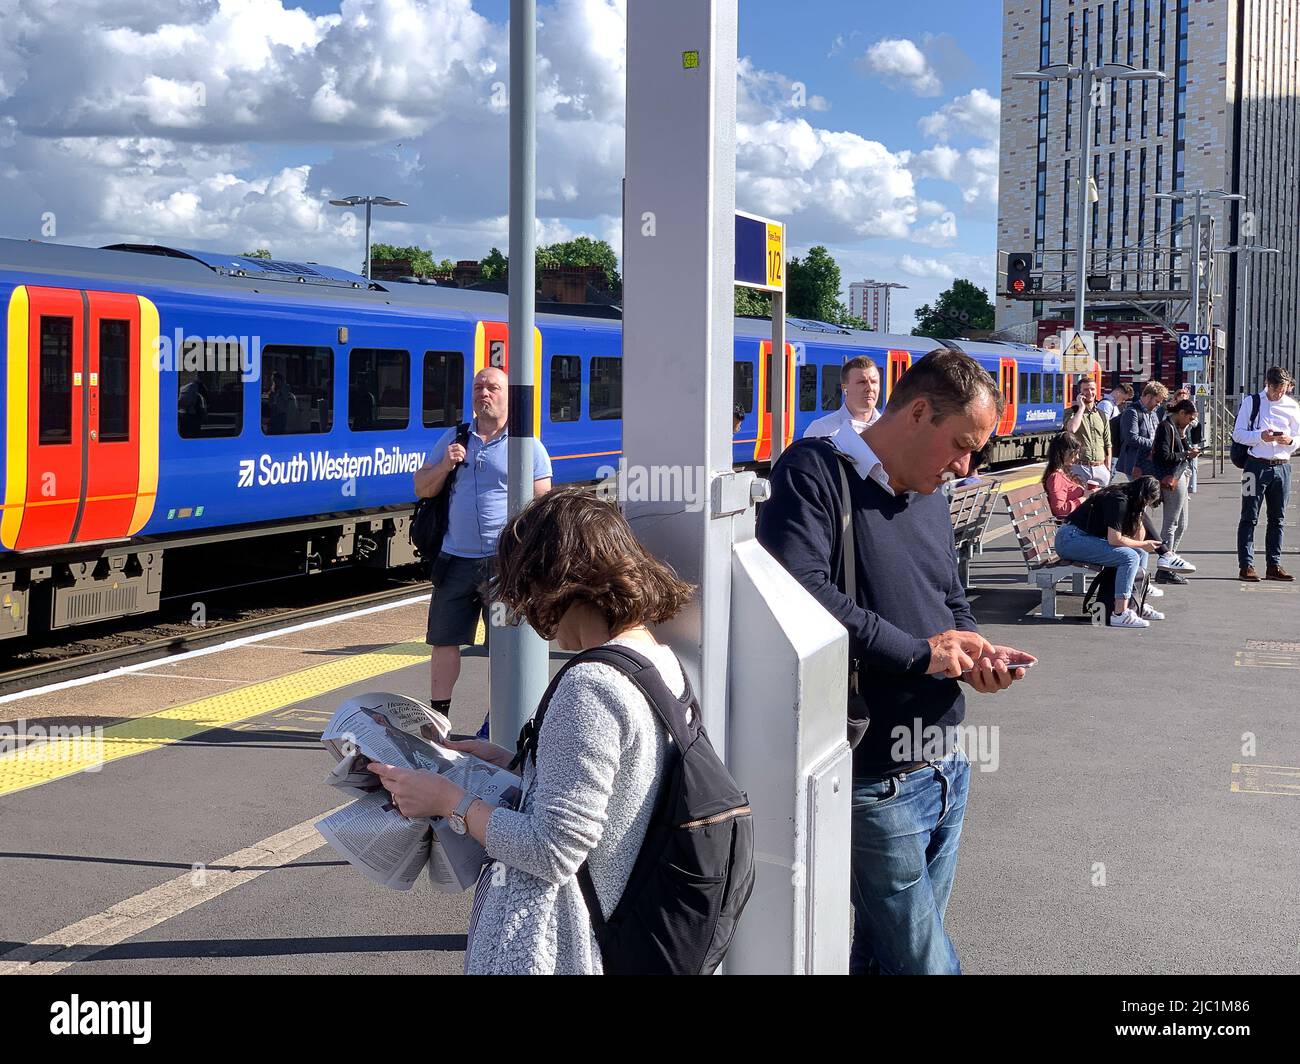 Vauxhall London Uk 8th June 2022 Commuters At Vauxhall Railway Station Rail Workers Are Set To Walk Out In A Three Day National Strike Towards The End Of This Month Which Is